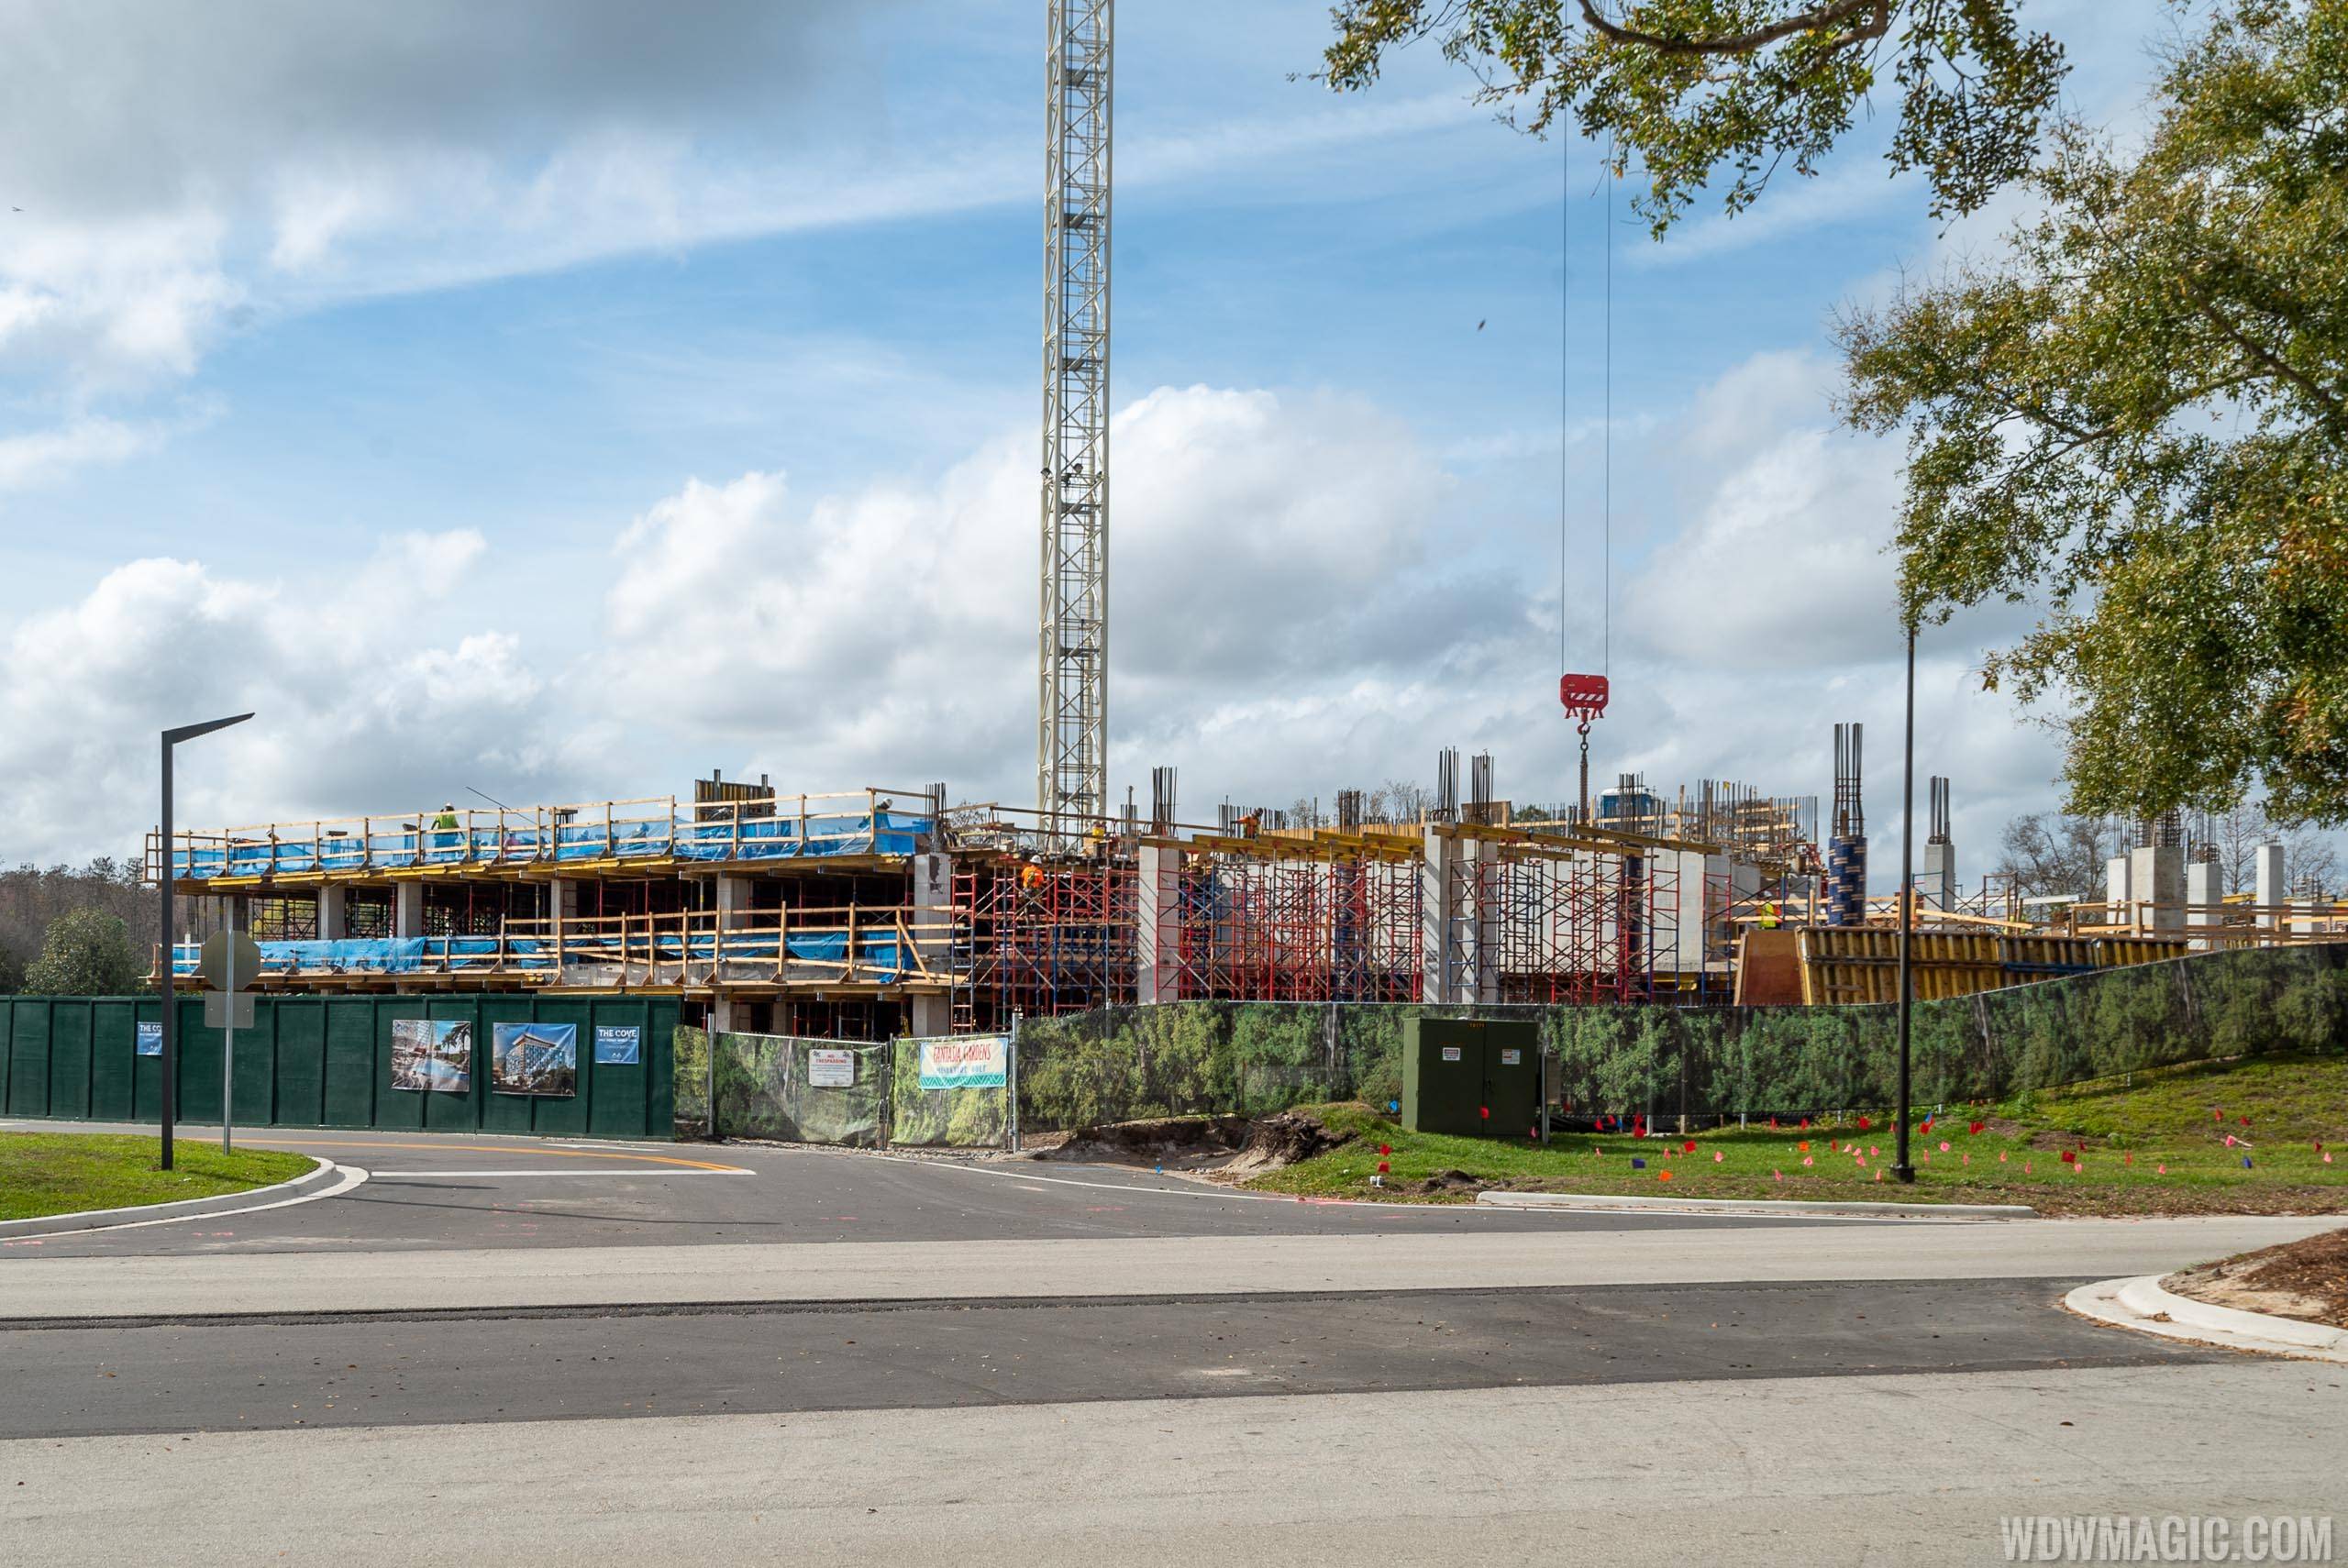 The Cove construction at the Walt Disney World Swan and Dolphin - February 2020